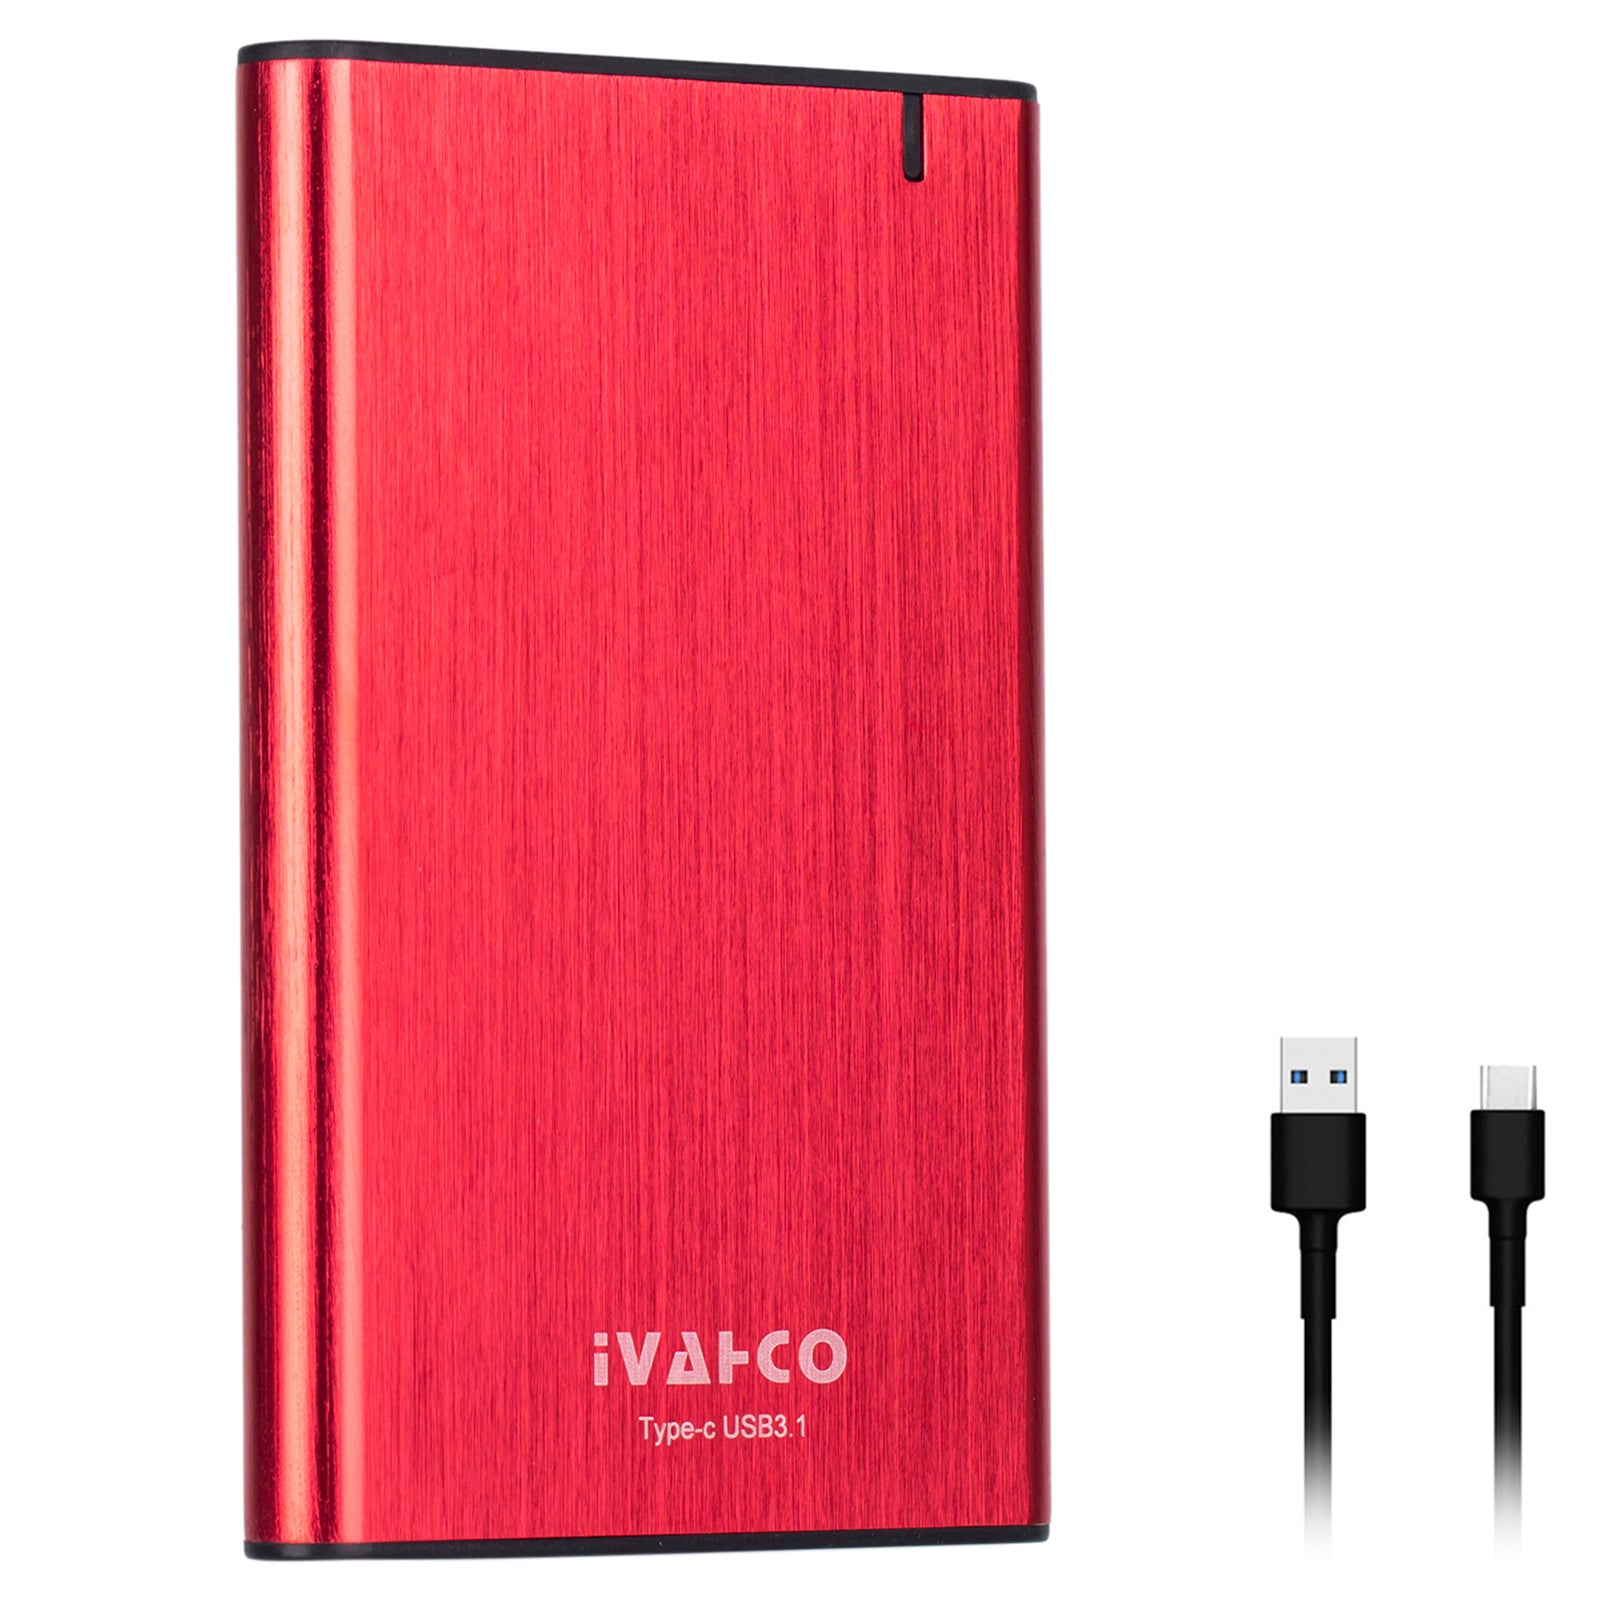 IVAHCO 750GB HDD External Case Type-C USB3.1 2.5" Brushed Metal Solid State Drive Enclosure with Indicator - Red